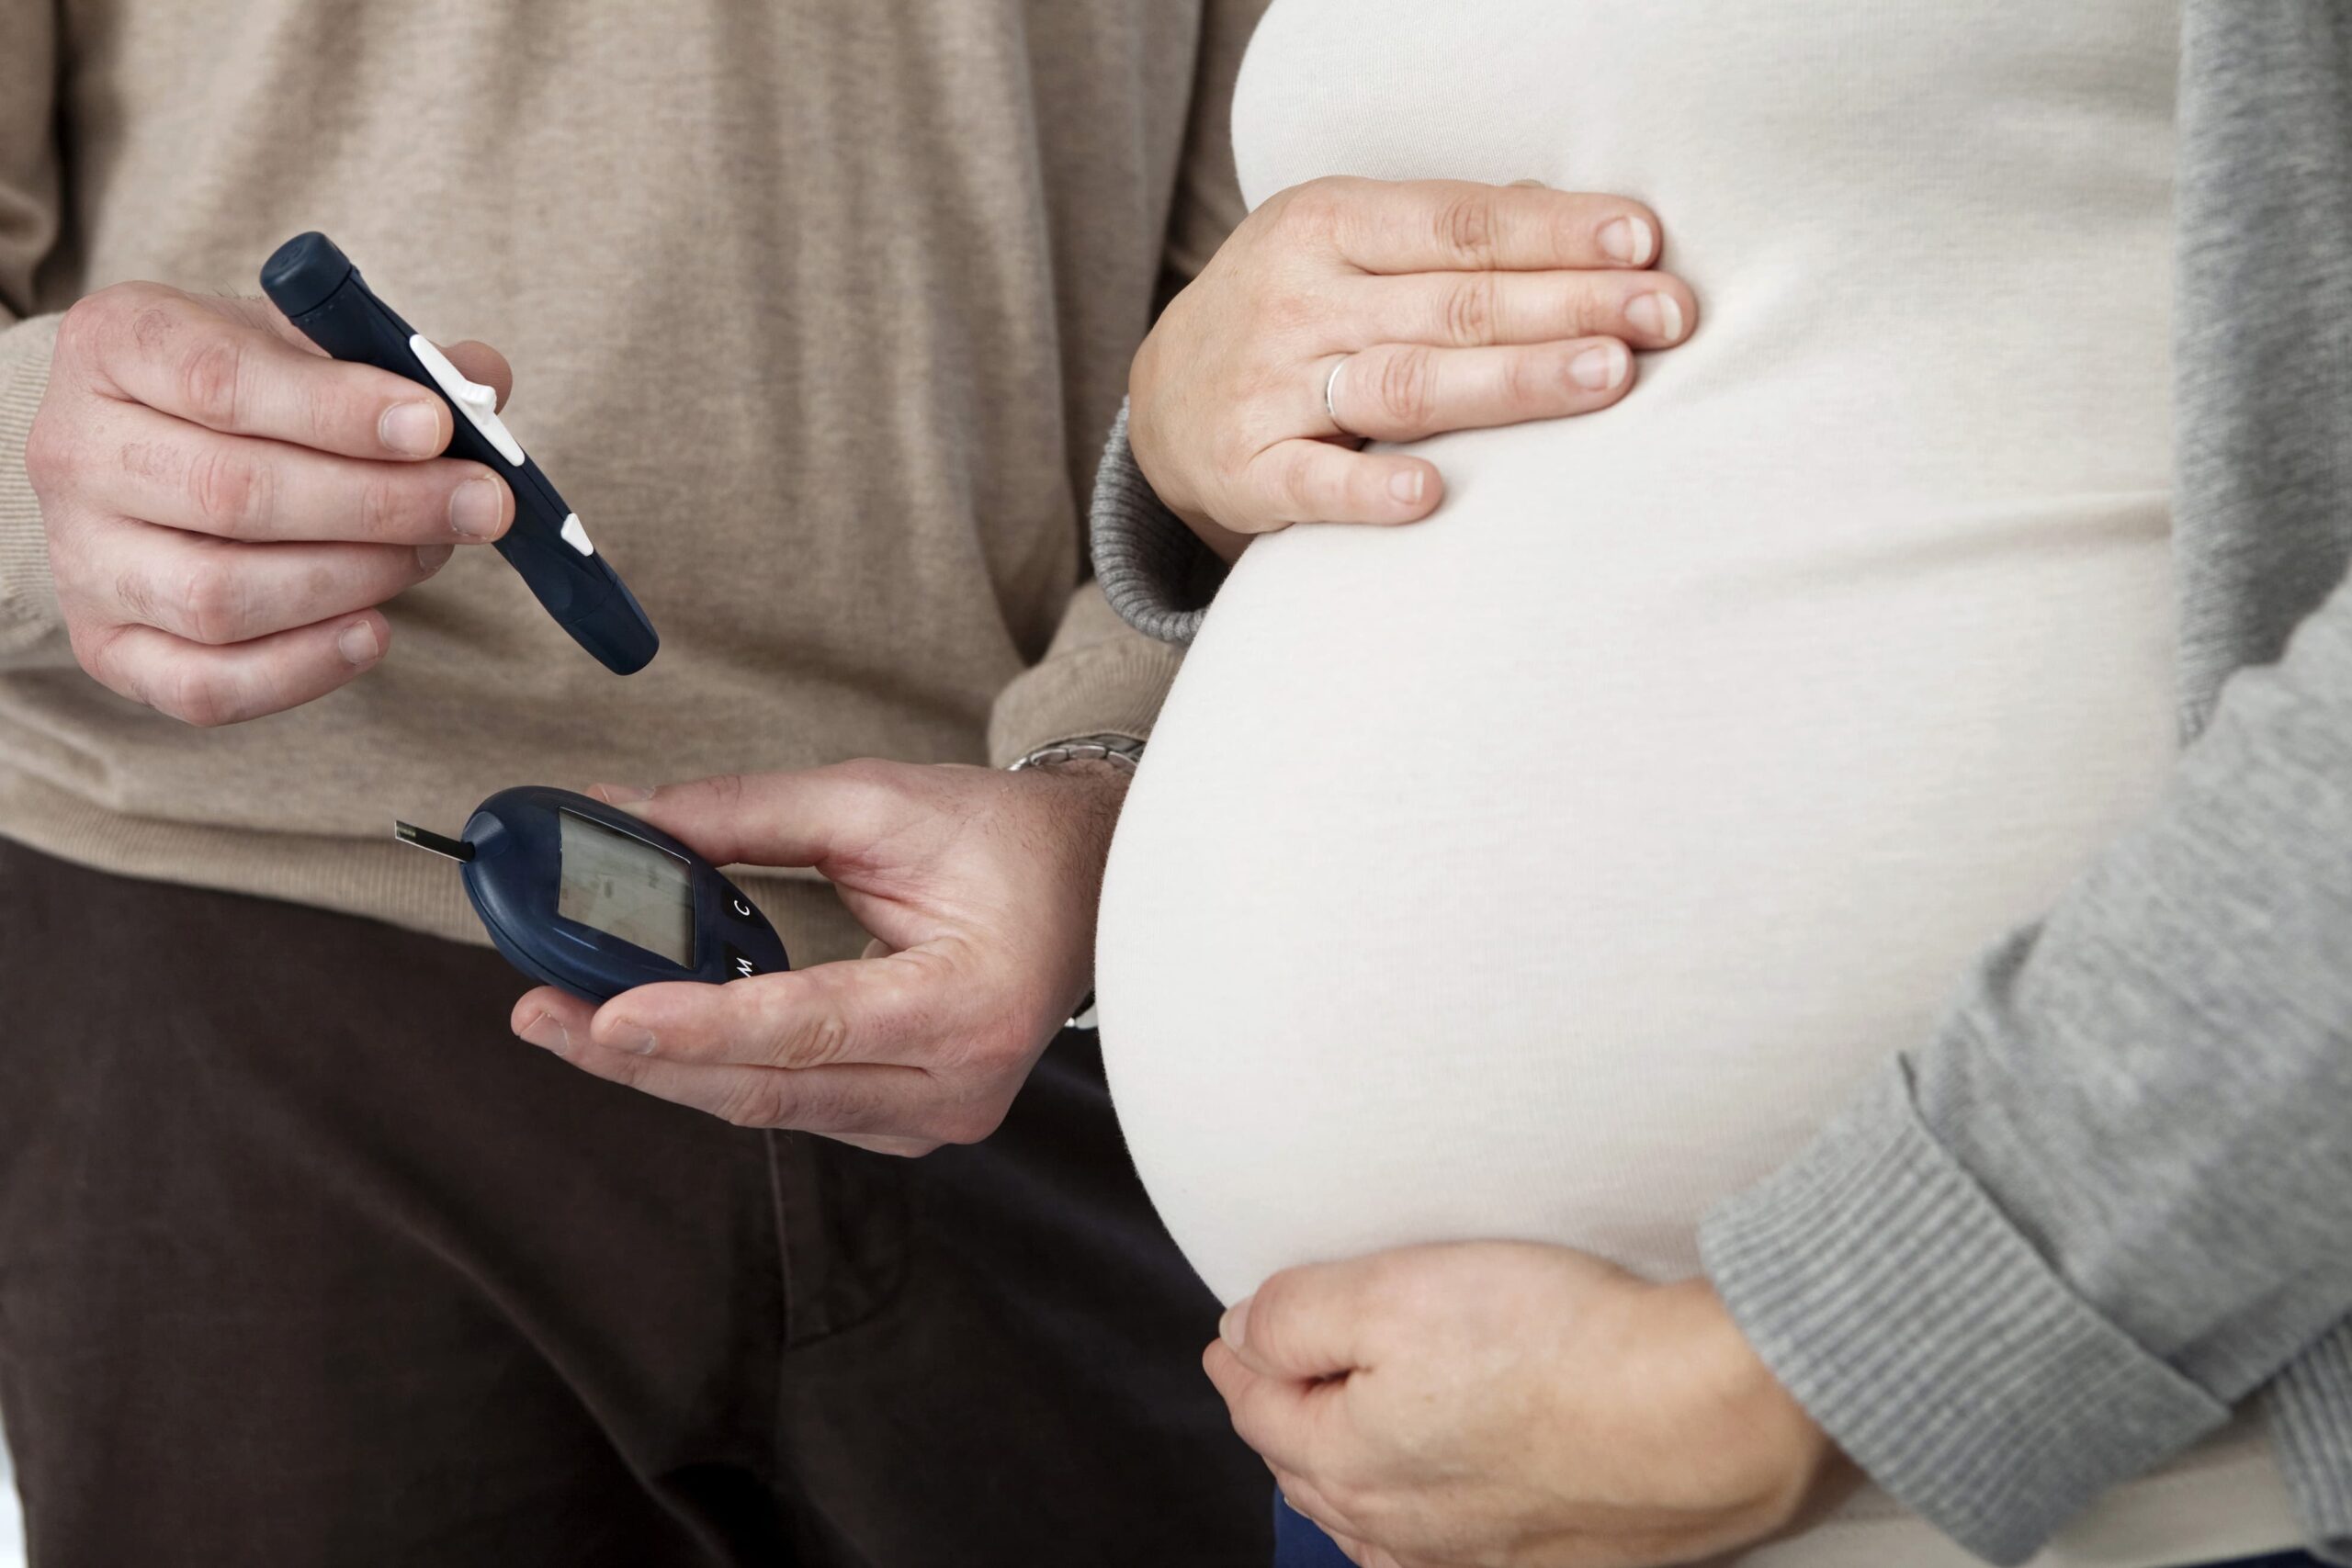 How Does Gestational Diabetes Affect My Baby